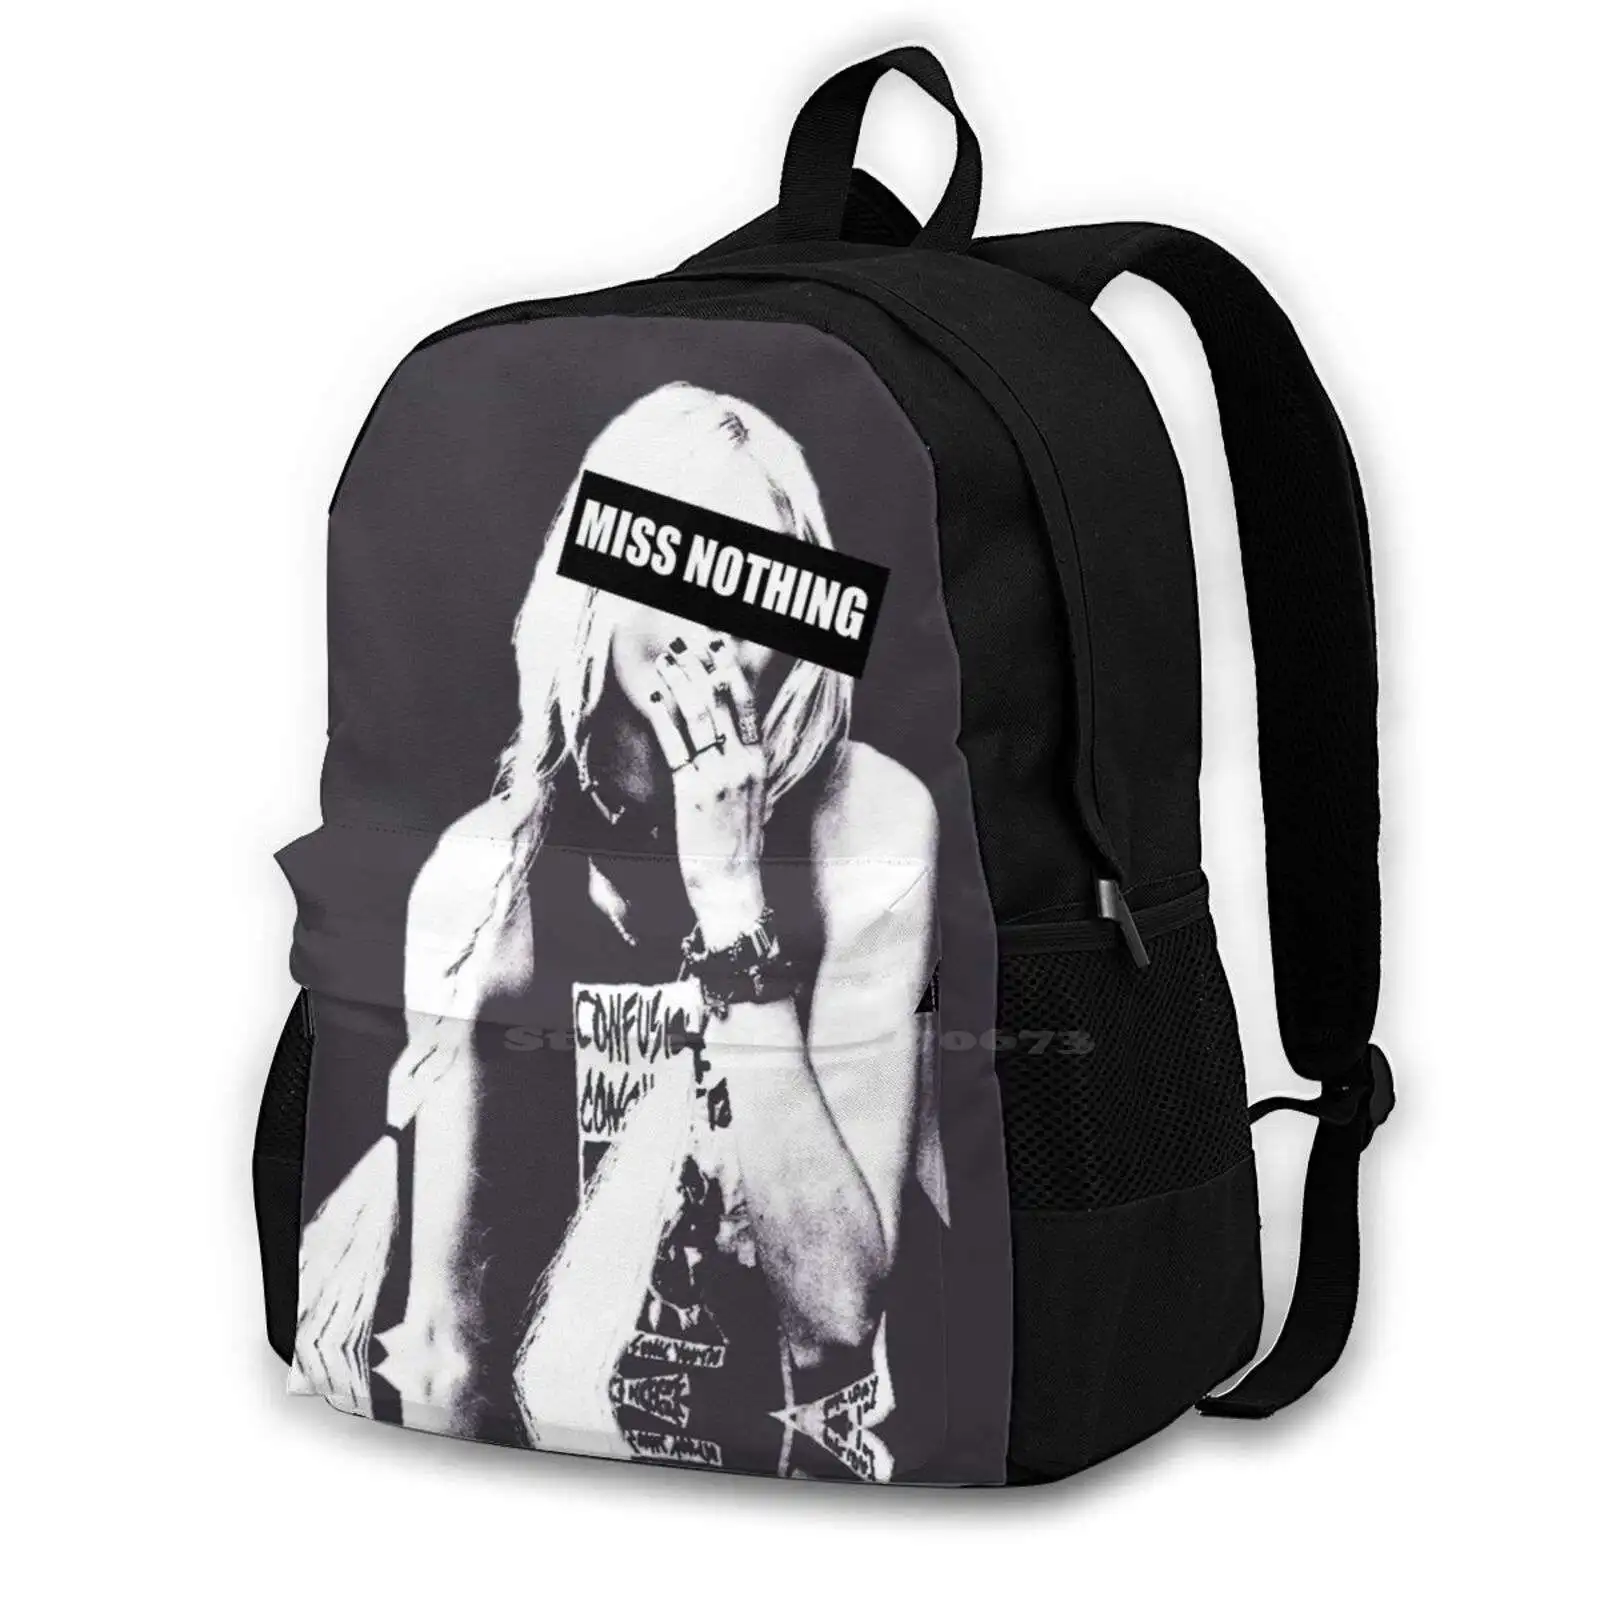 

Miss Nothing Rucksack Knapsack Storage Bag Backpack Taylor Momsen Taylor Momsen Miss Nothing Miss Nothing The Pretty Reckless